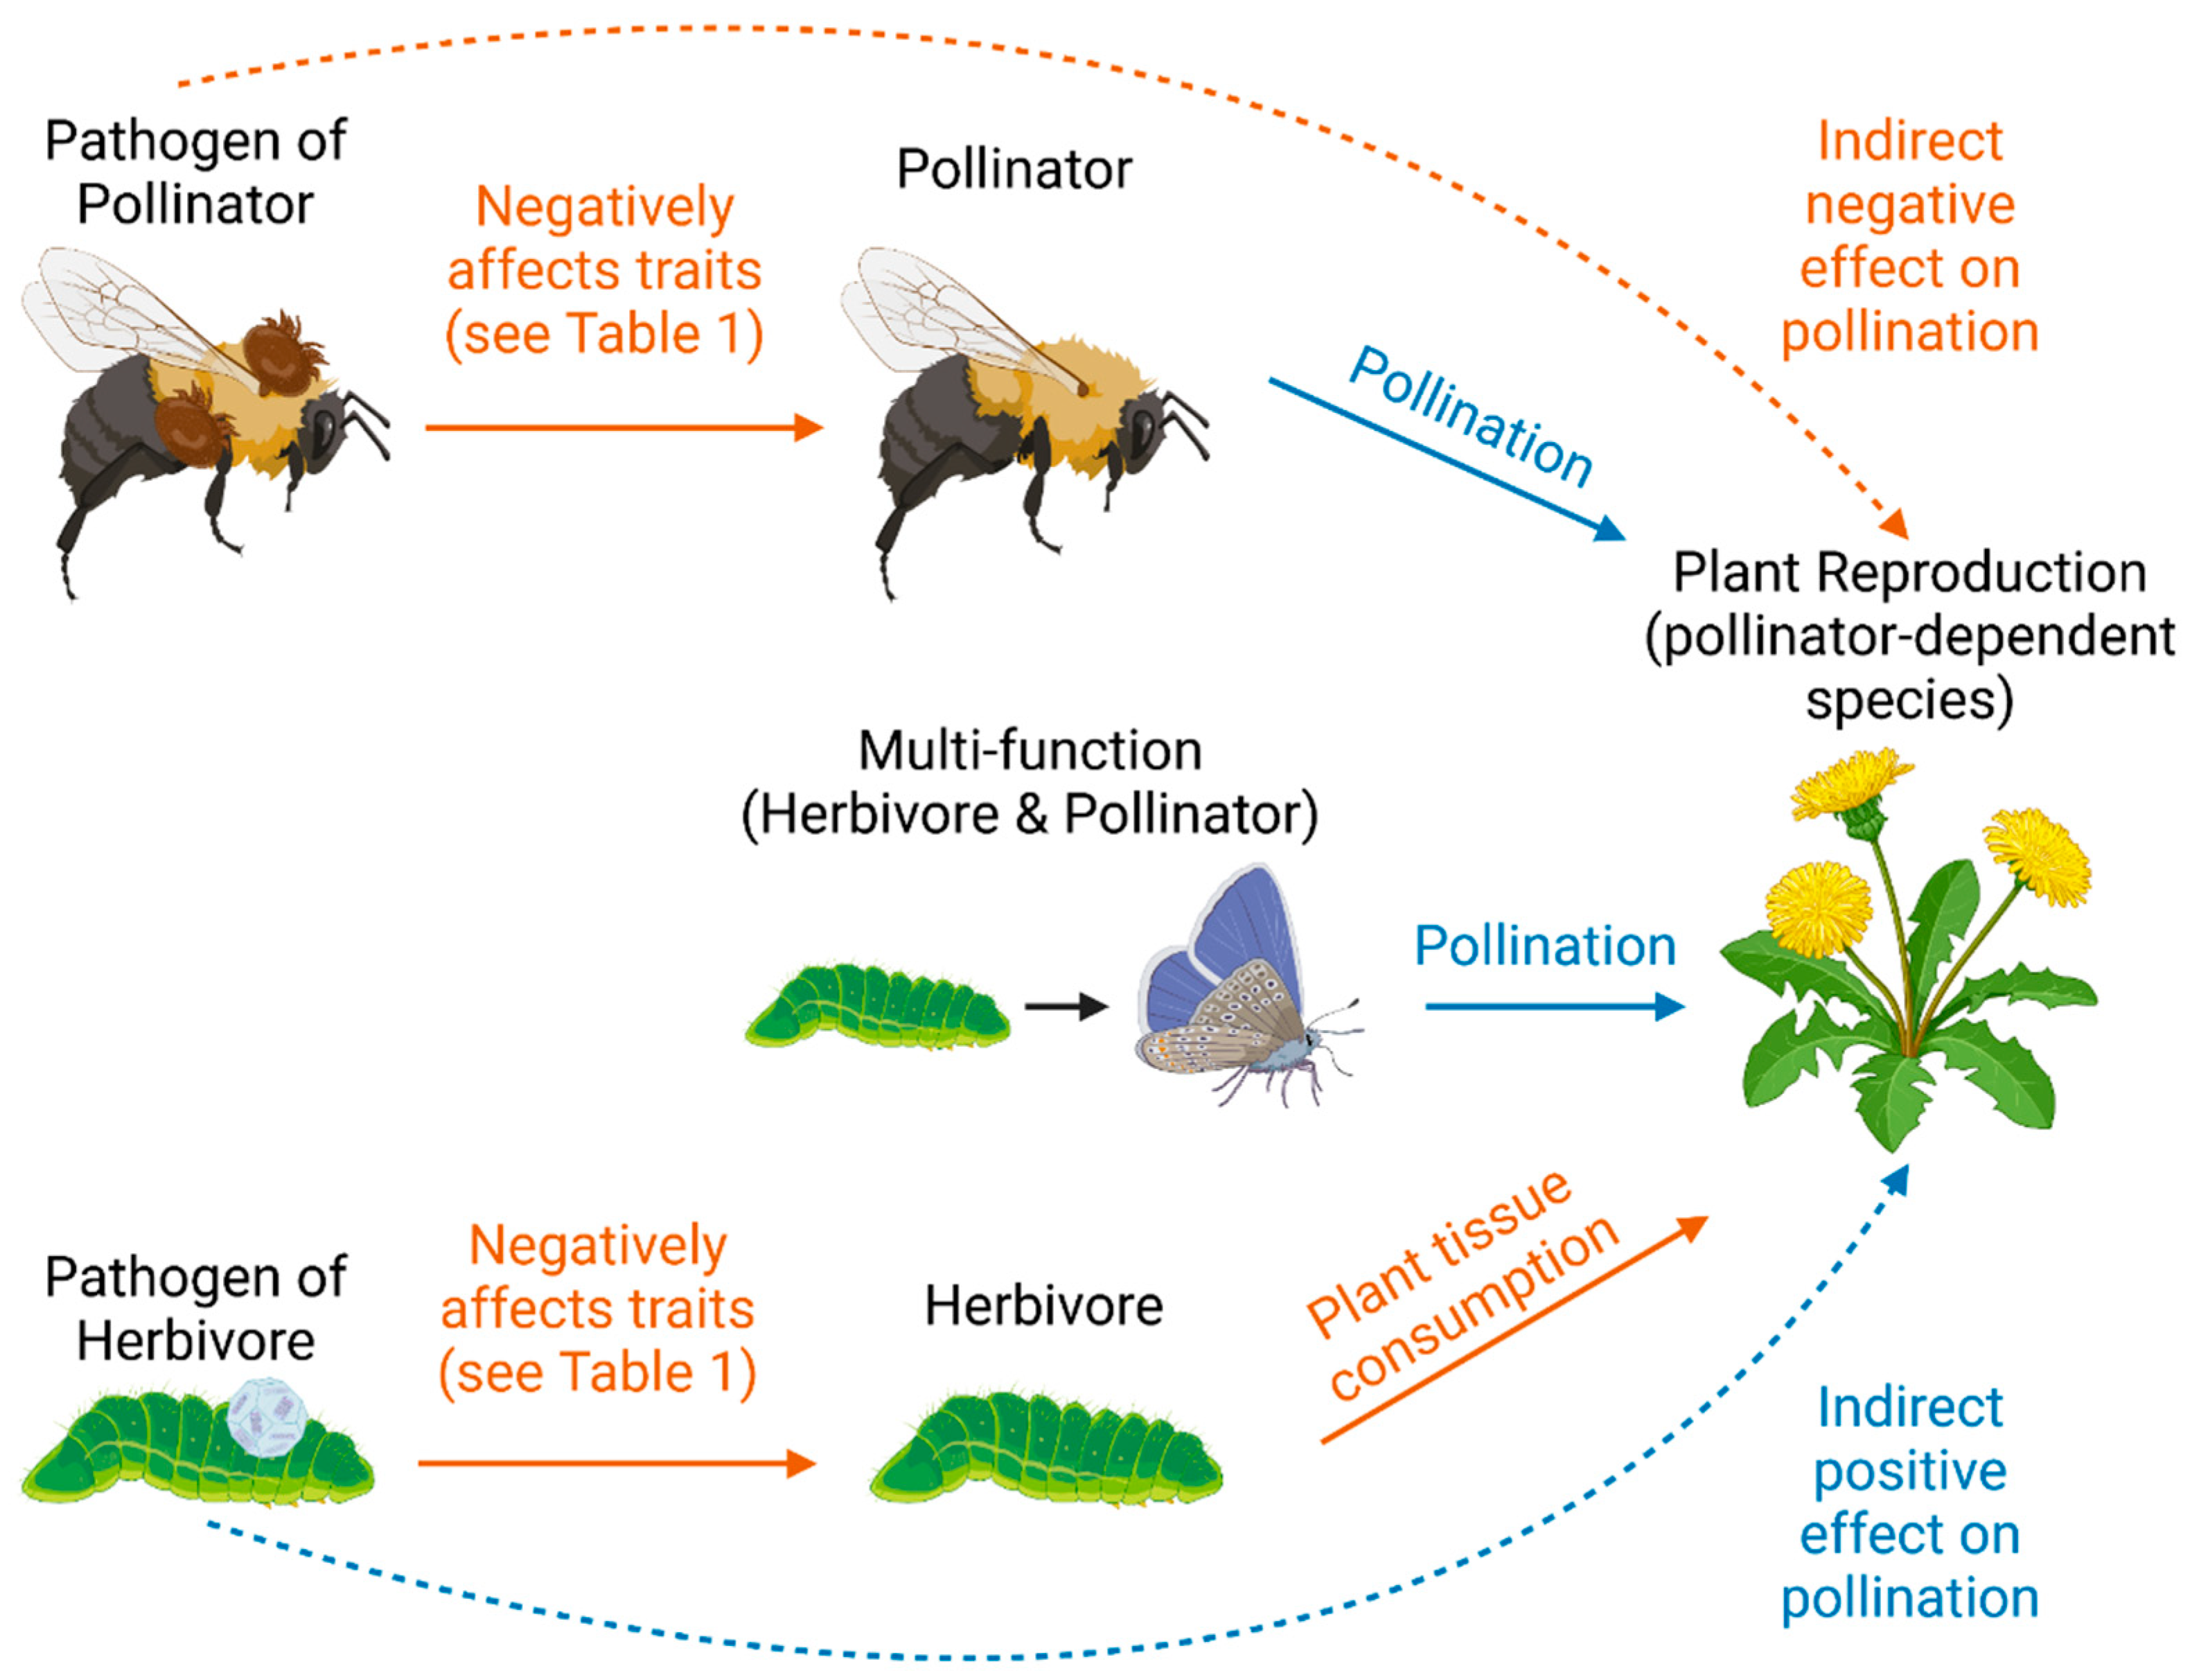 I. Introduction to Pollination and its Significance in Seed Production and Plant Reproduction